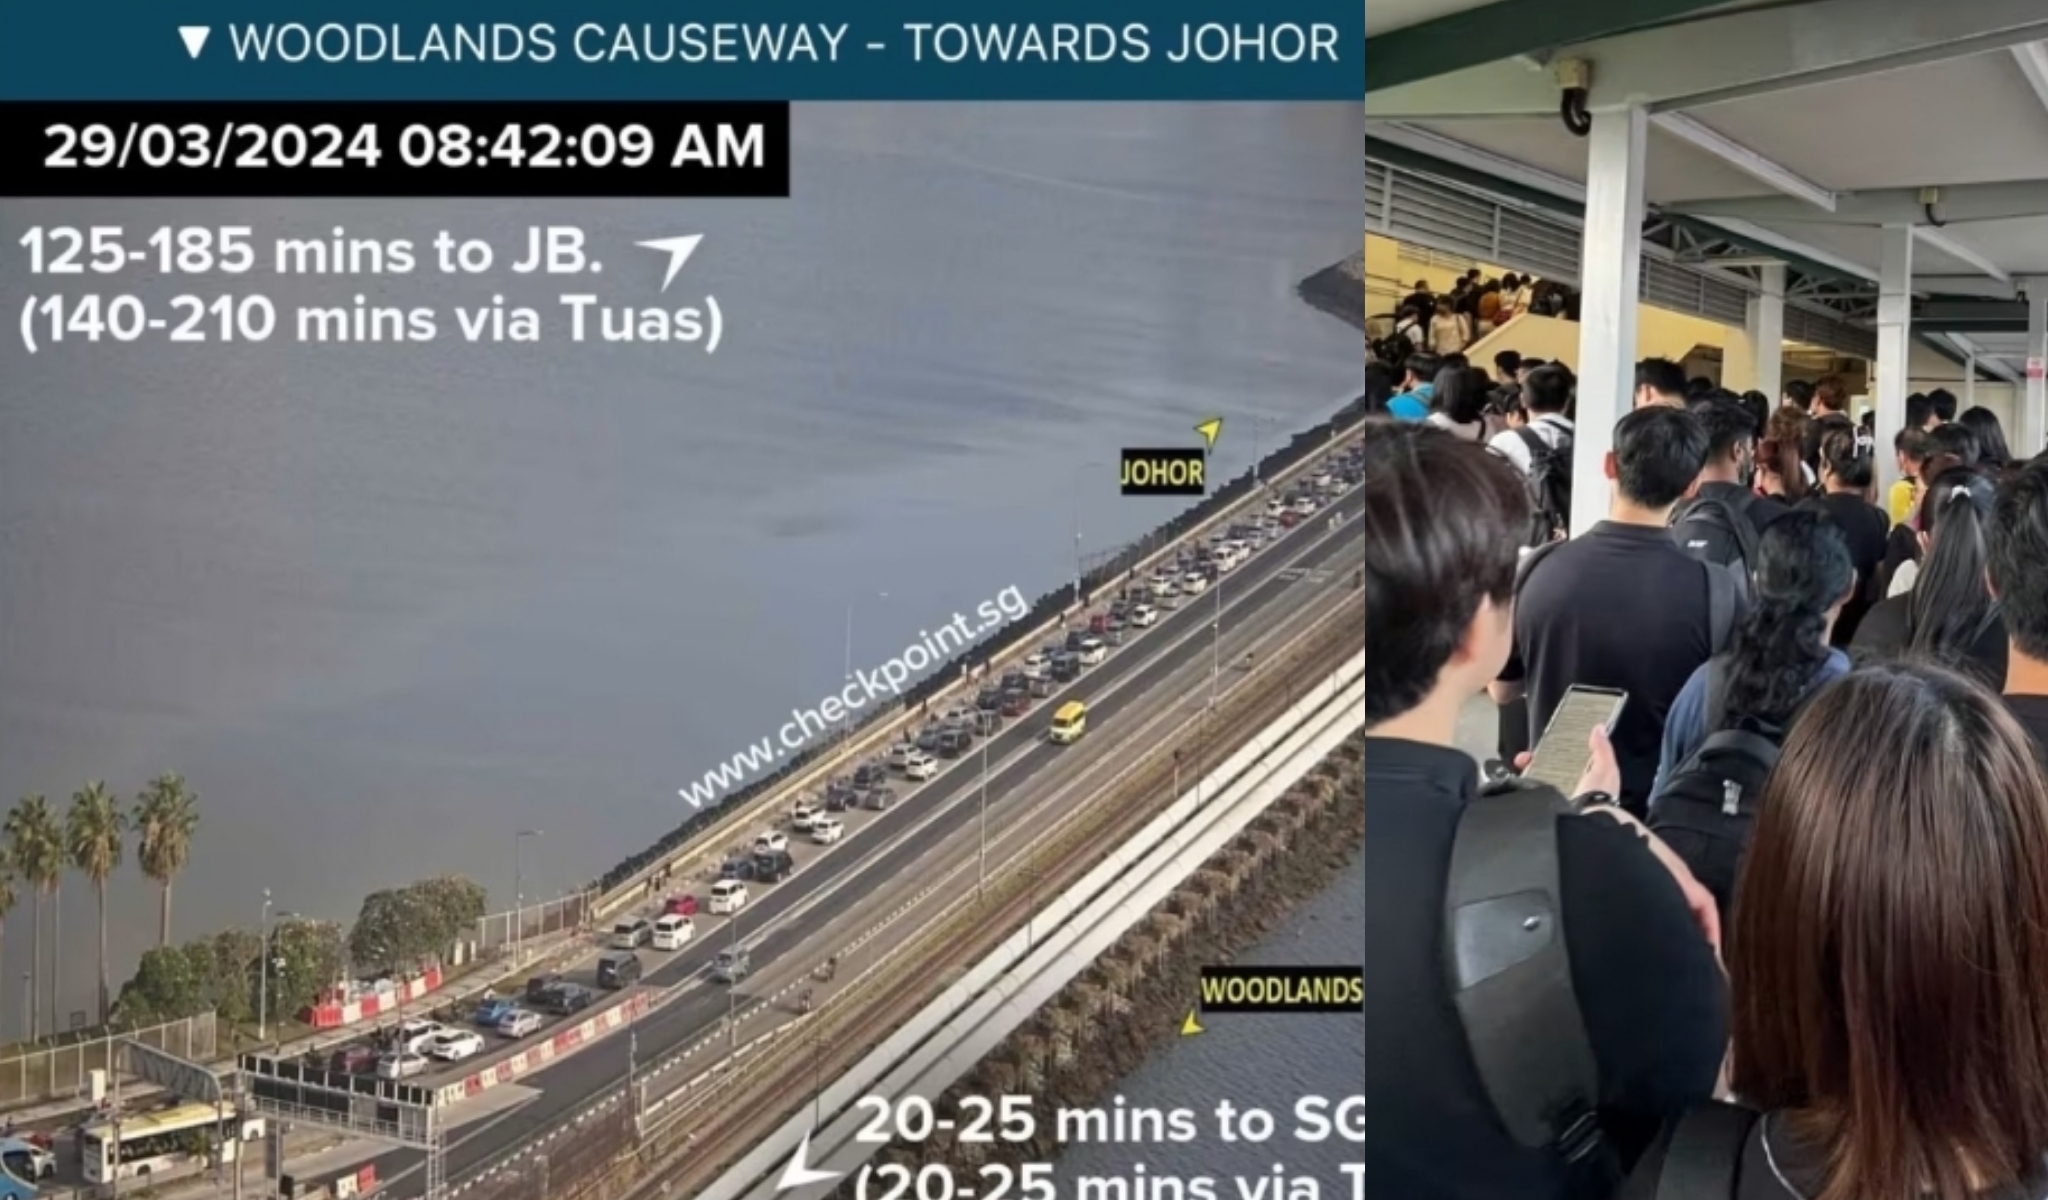 Massive traffic jam at land checkpoints, with 3-hour wait to cross to JB on Good Friday